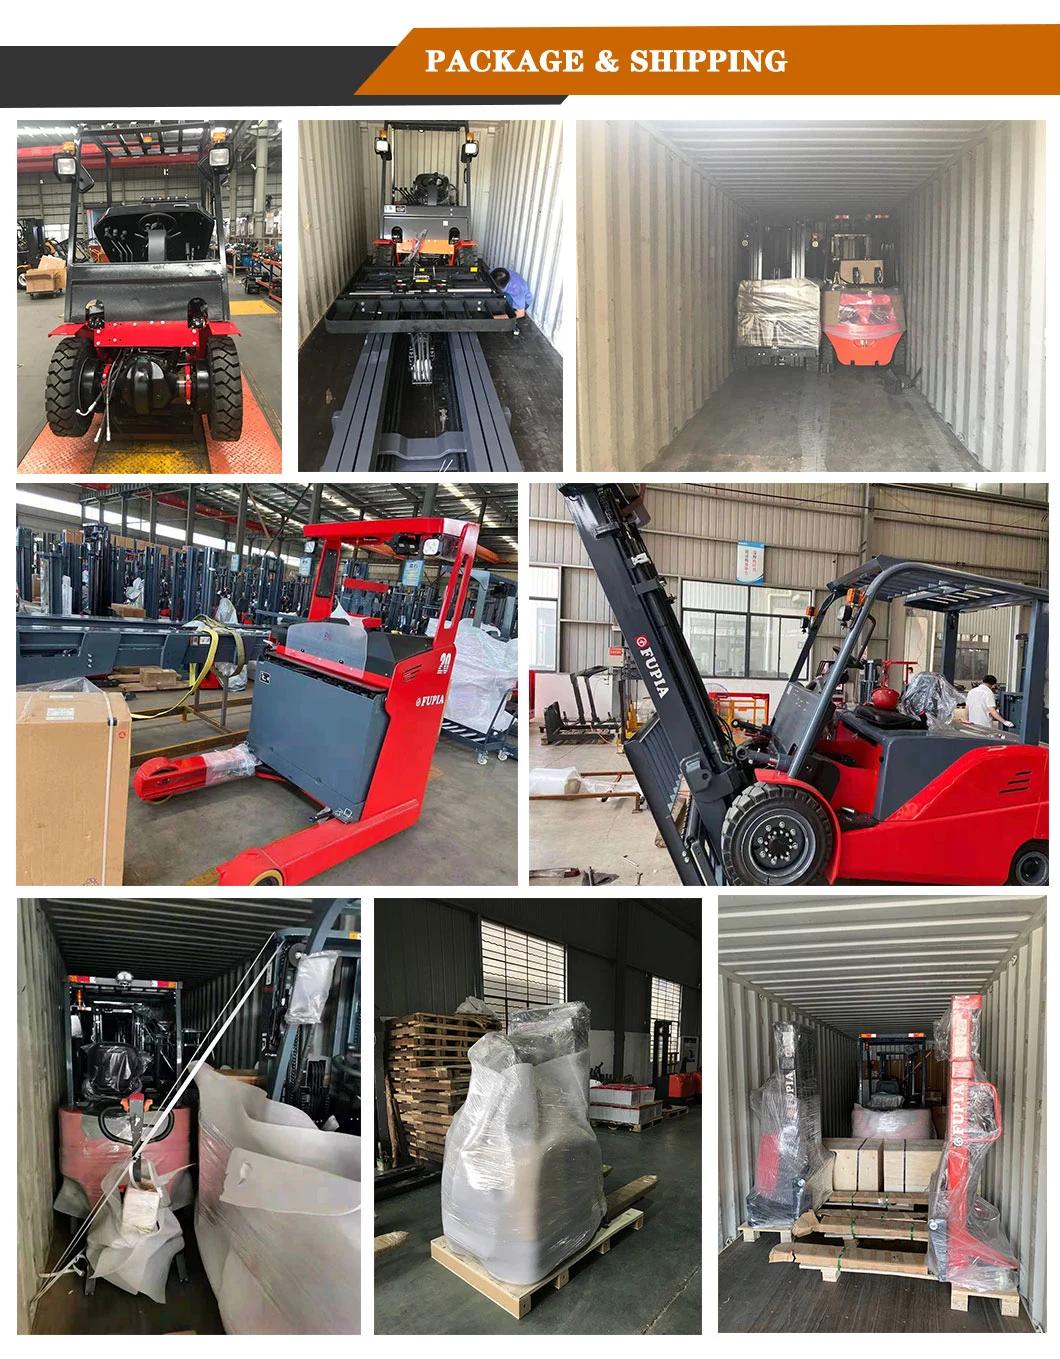 Electric Load Lifter 1500 to 2000kg Cheap Electric Forklift Price